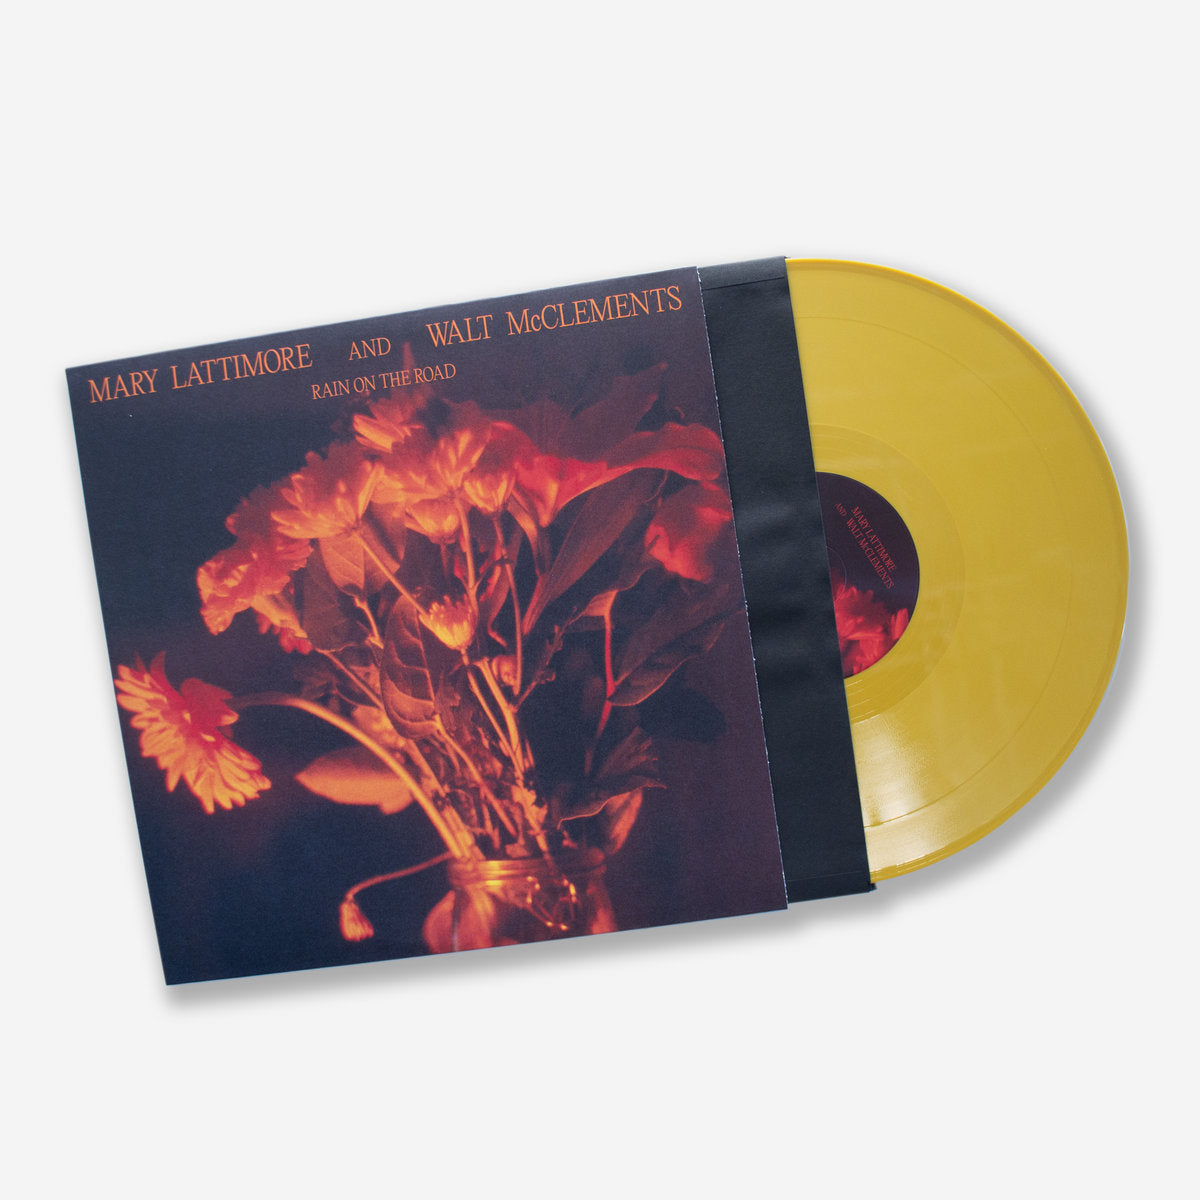 Mary Lattimore and Walt McClements -  Rain on the Road LP (Limited Edition Metallic Gold Vinyl)